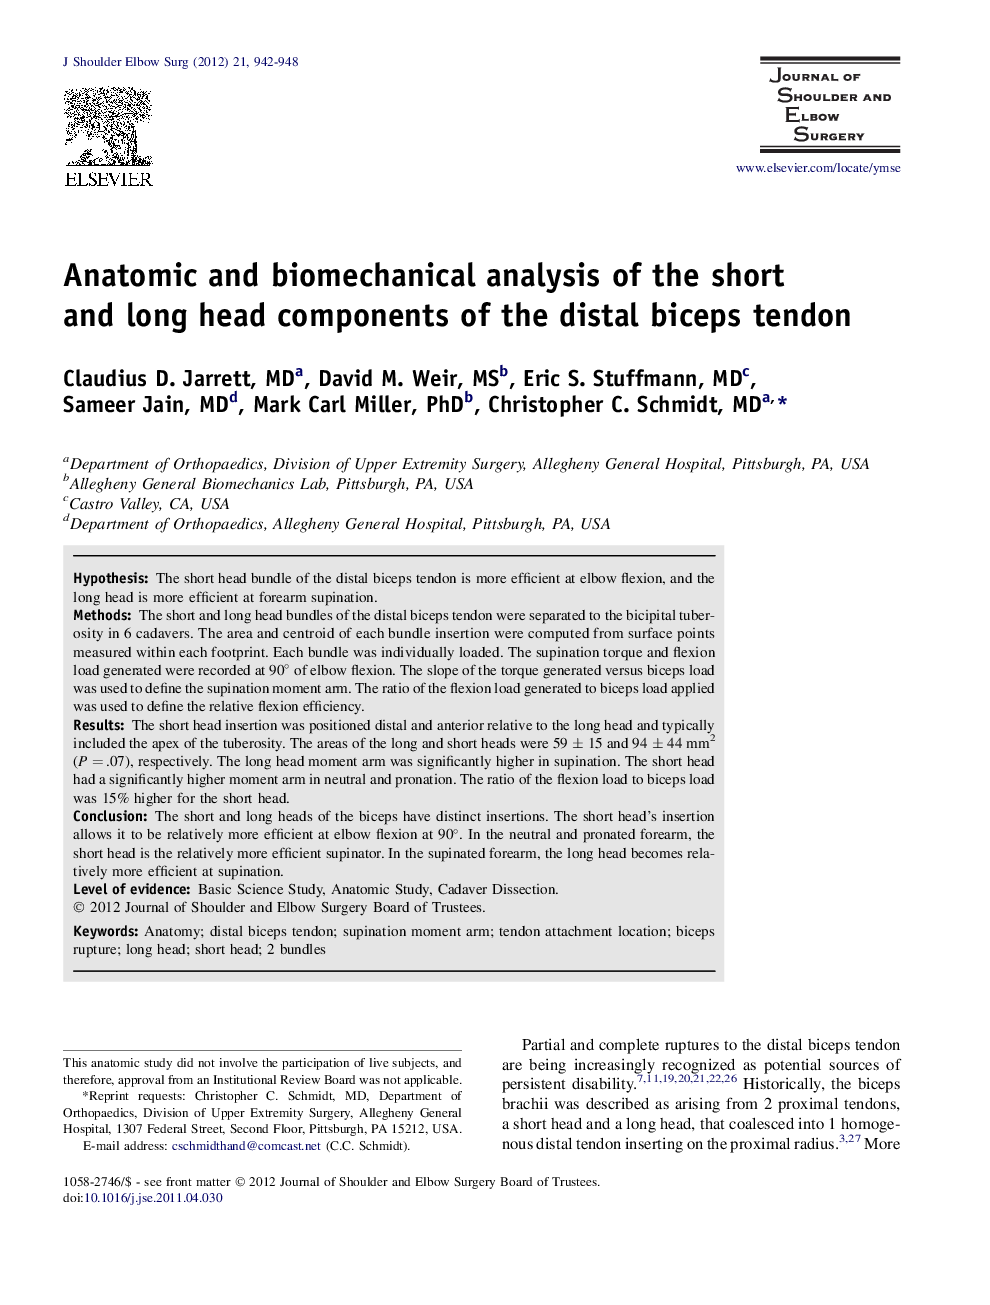 Anatomic and biomechanical analysis of the short and long head components of the distal biceps tendon 